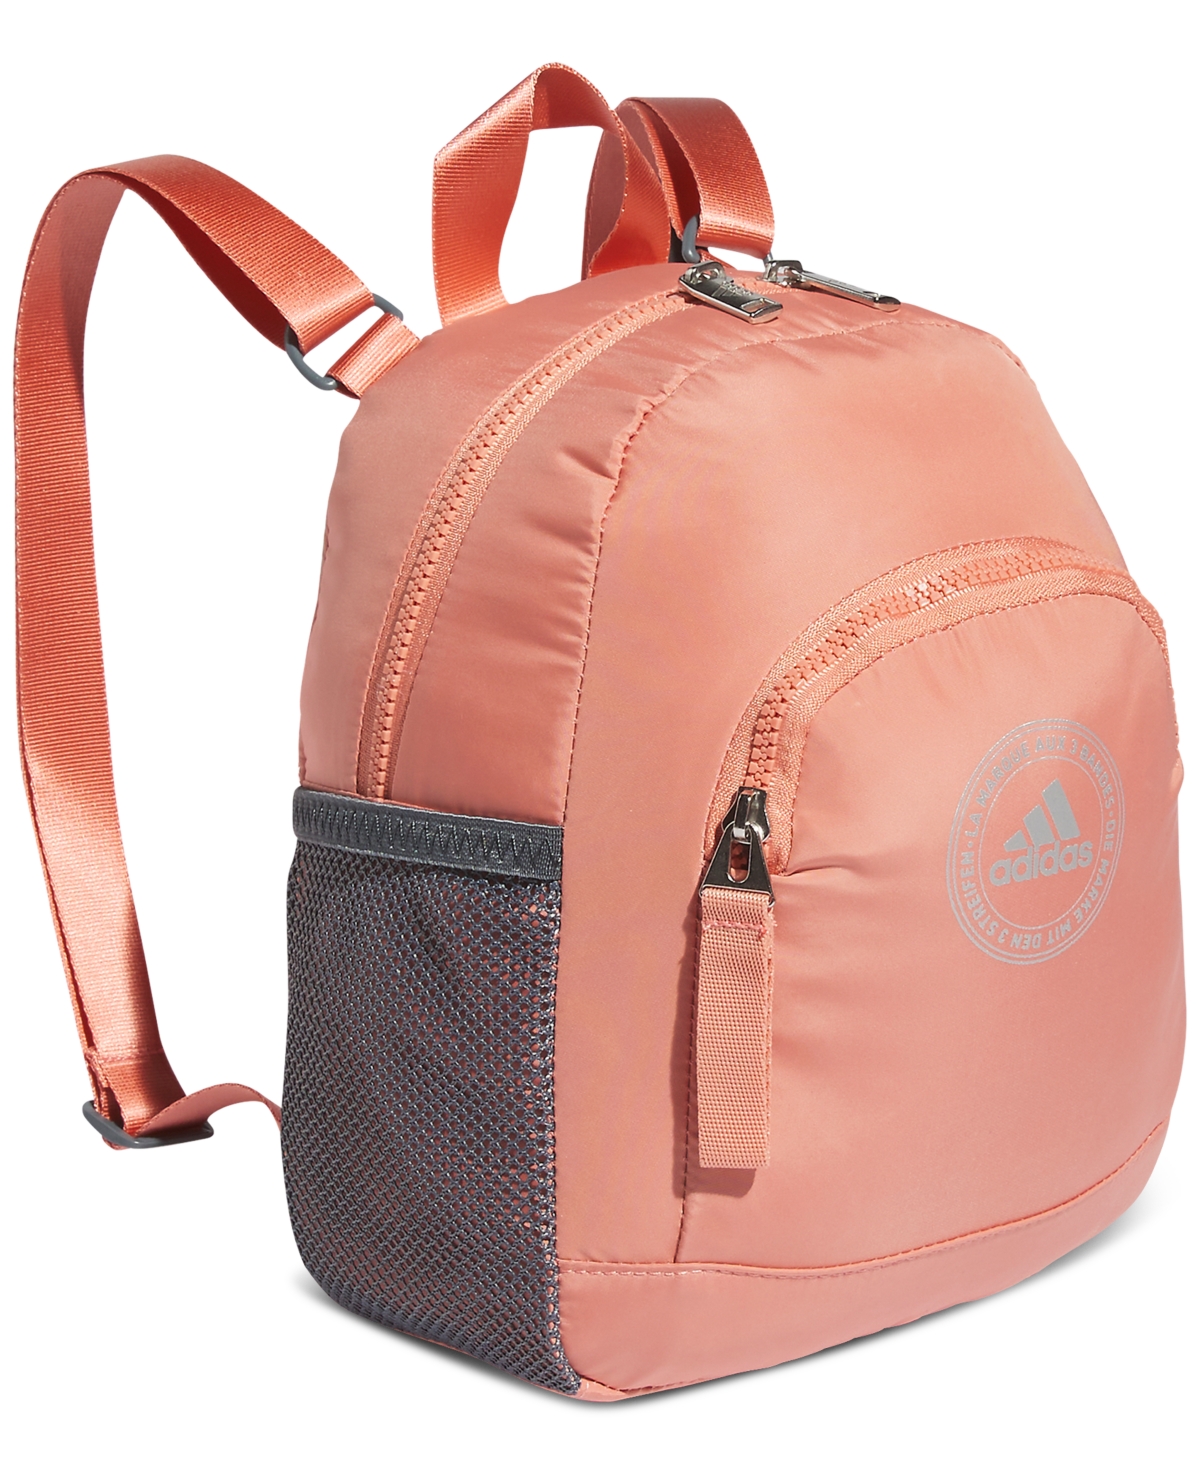 Adidas Originals Women's Linear 3 Mini Backpack In Coral